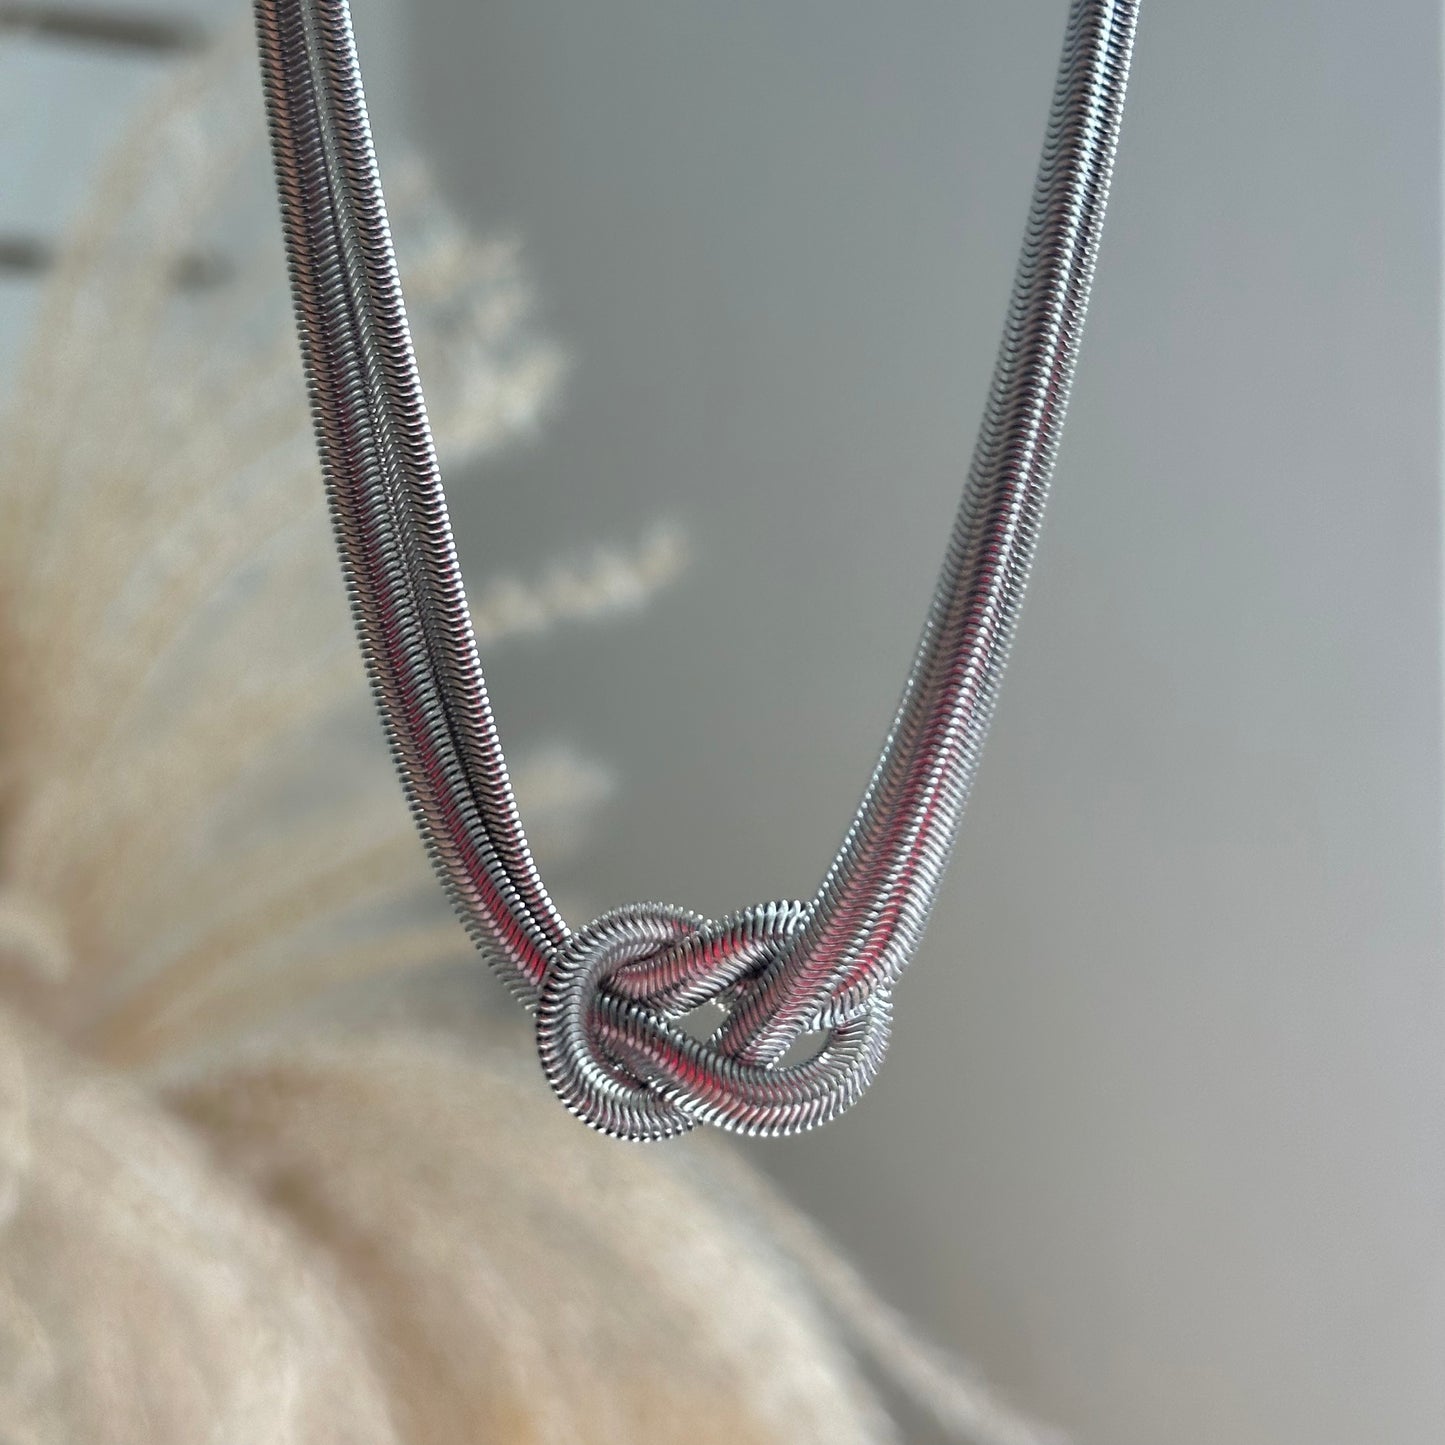 The Silver Knot Necklace